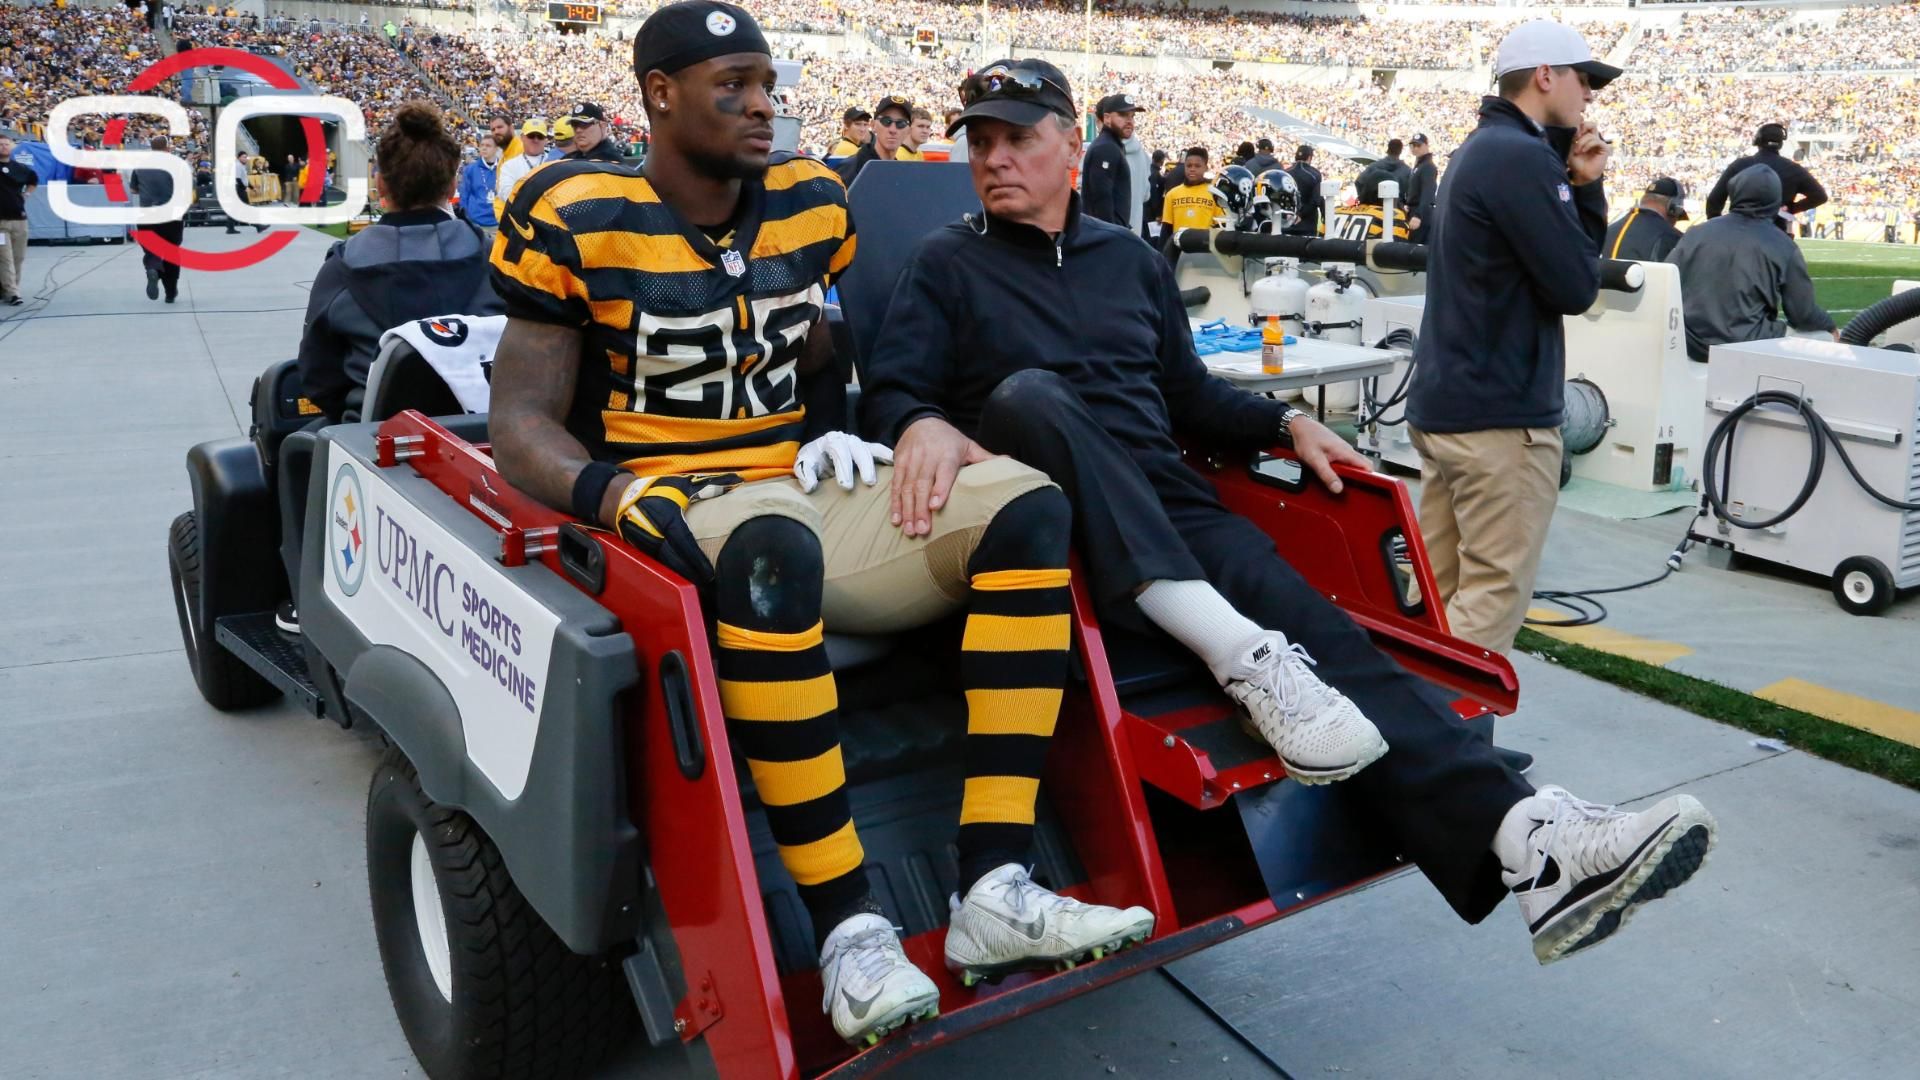 Expected recovery time for Le'Veon Bell